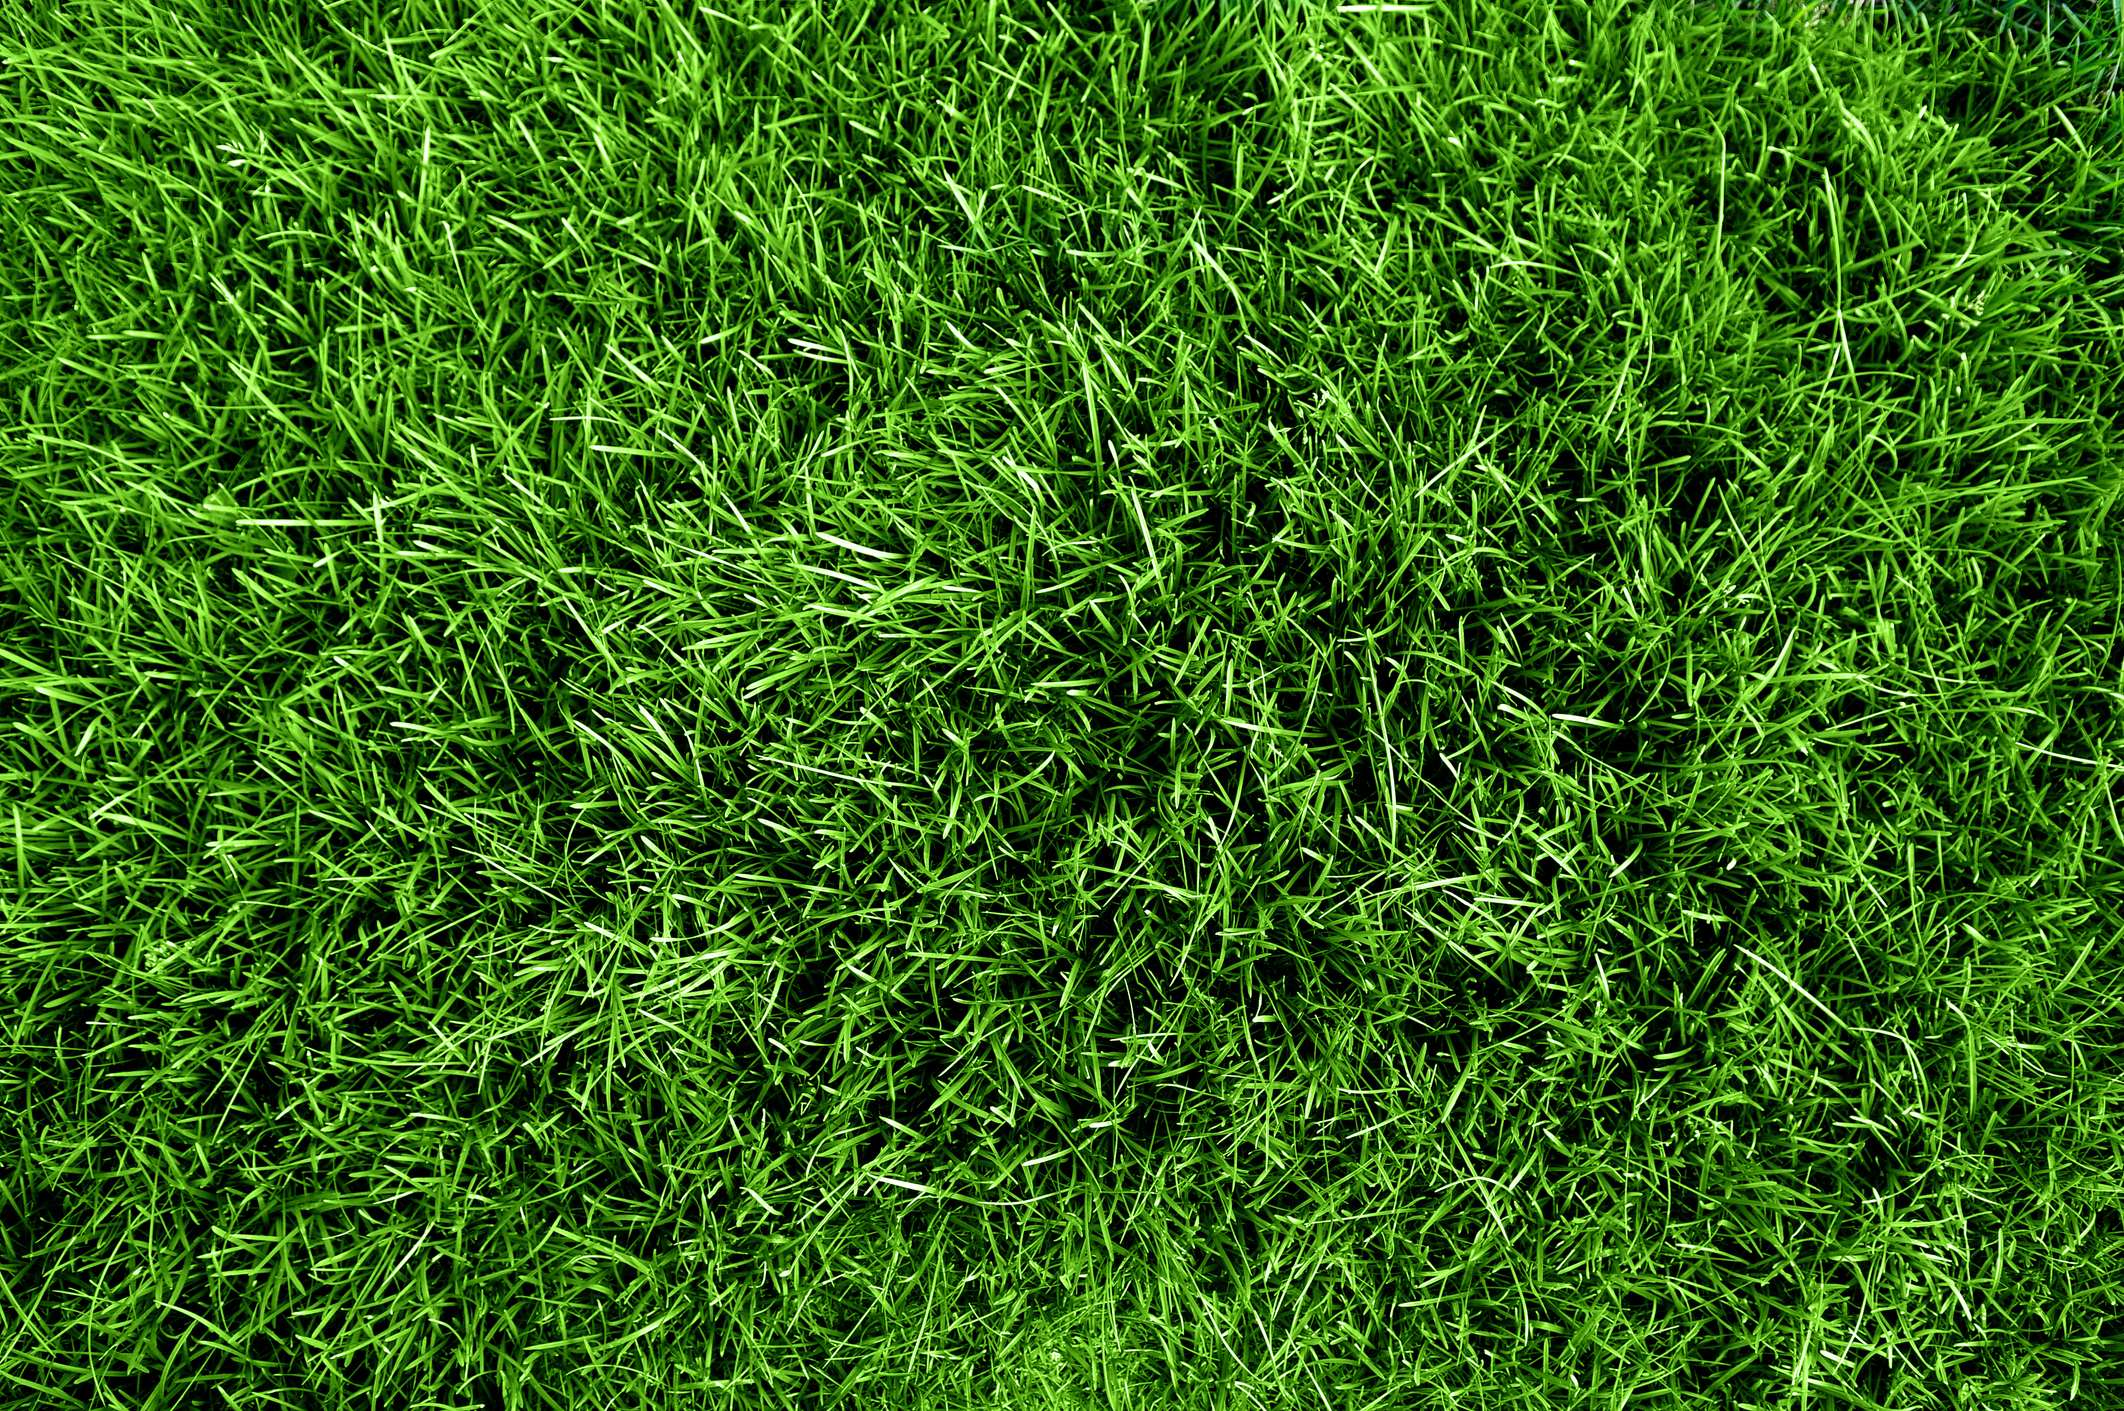 National Lawn Care Growth Research Grass